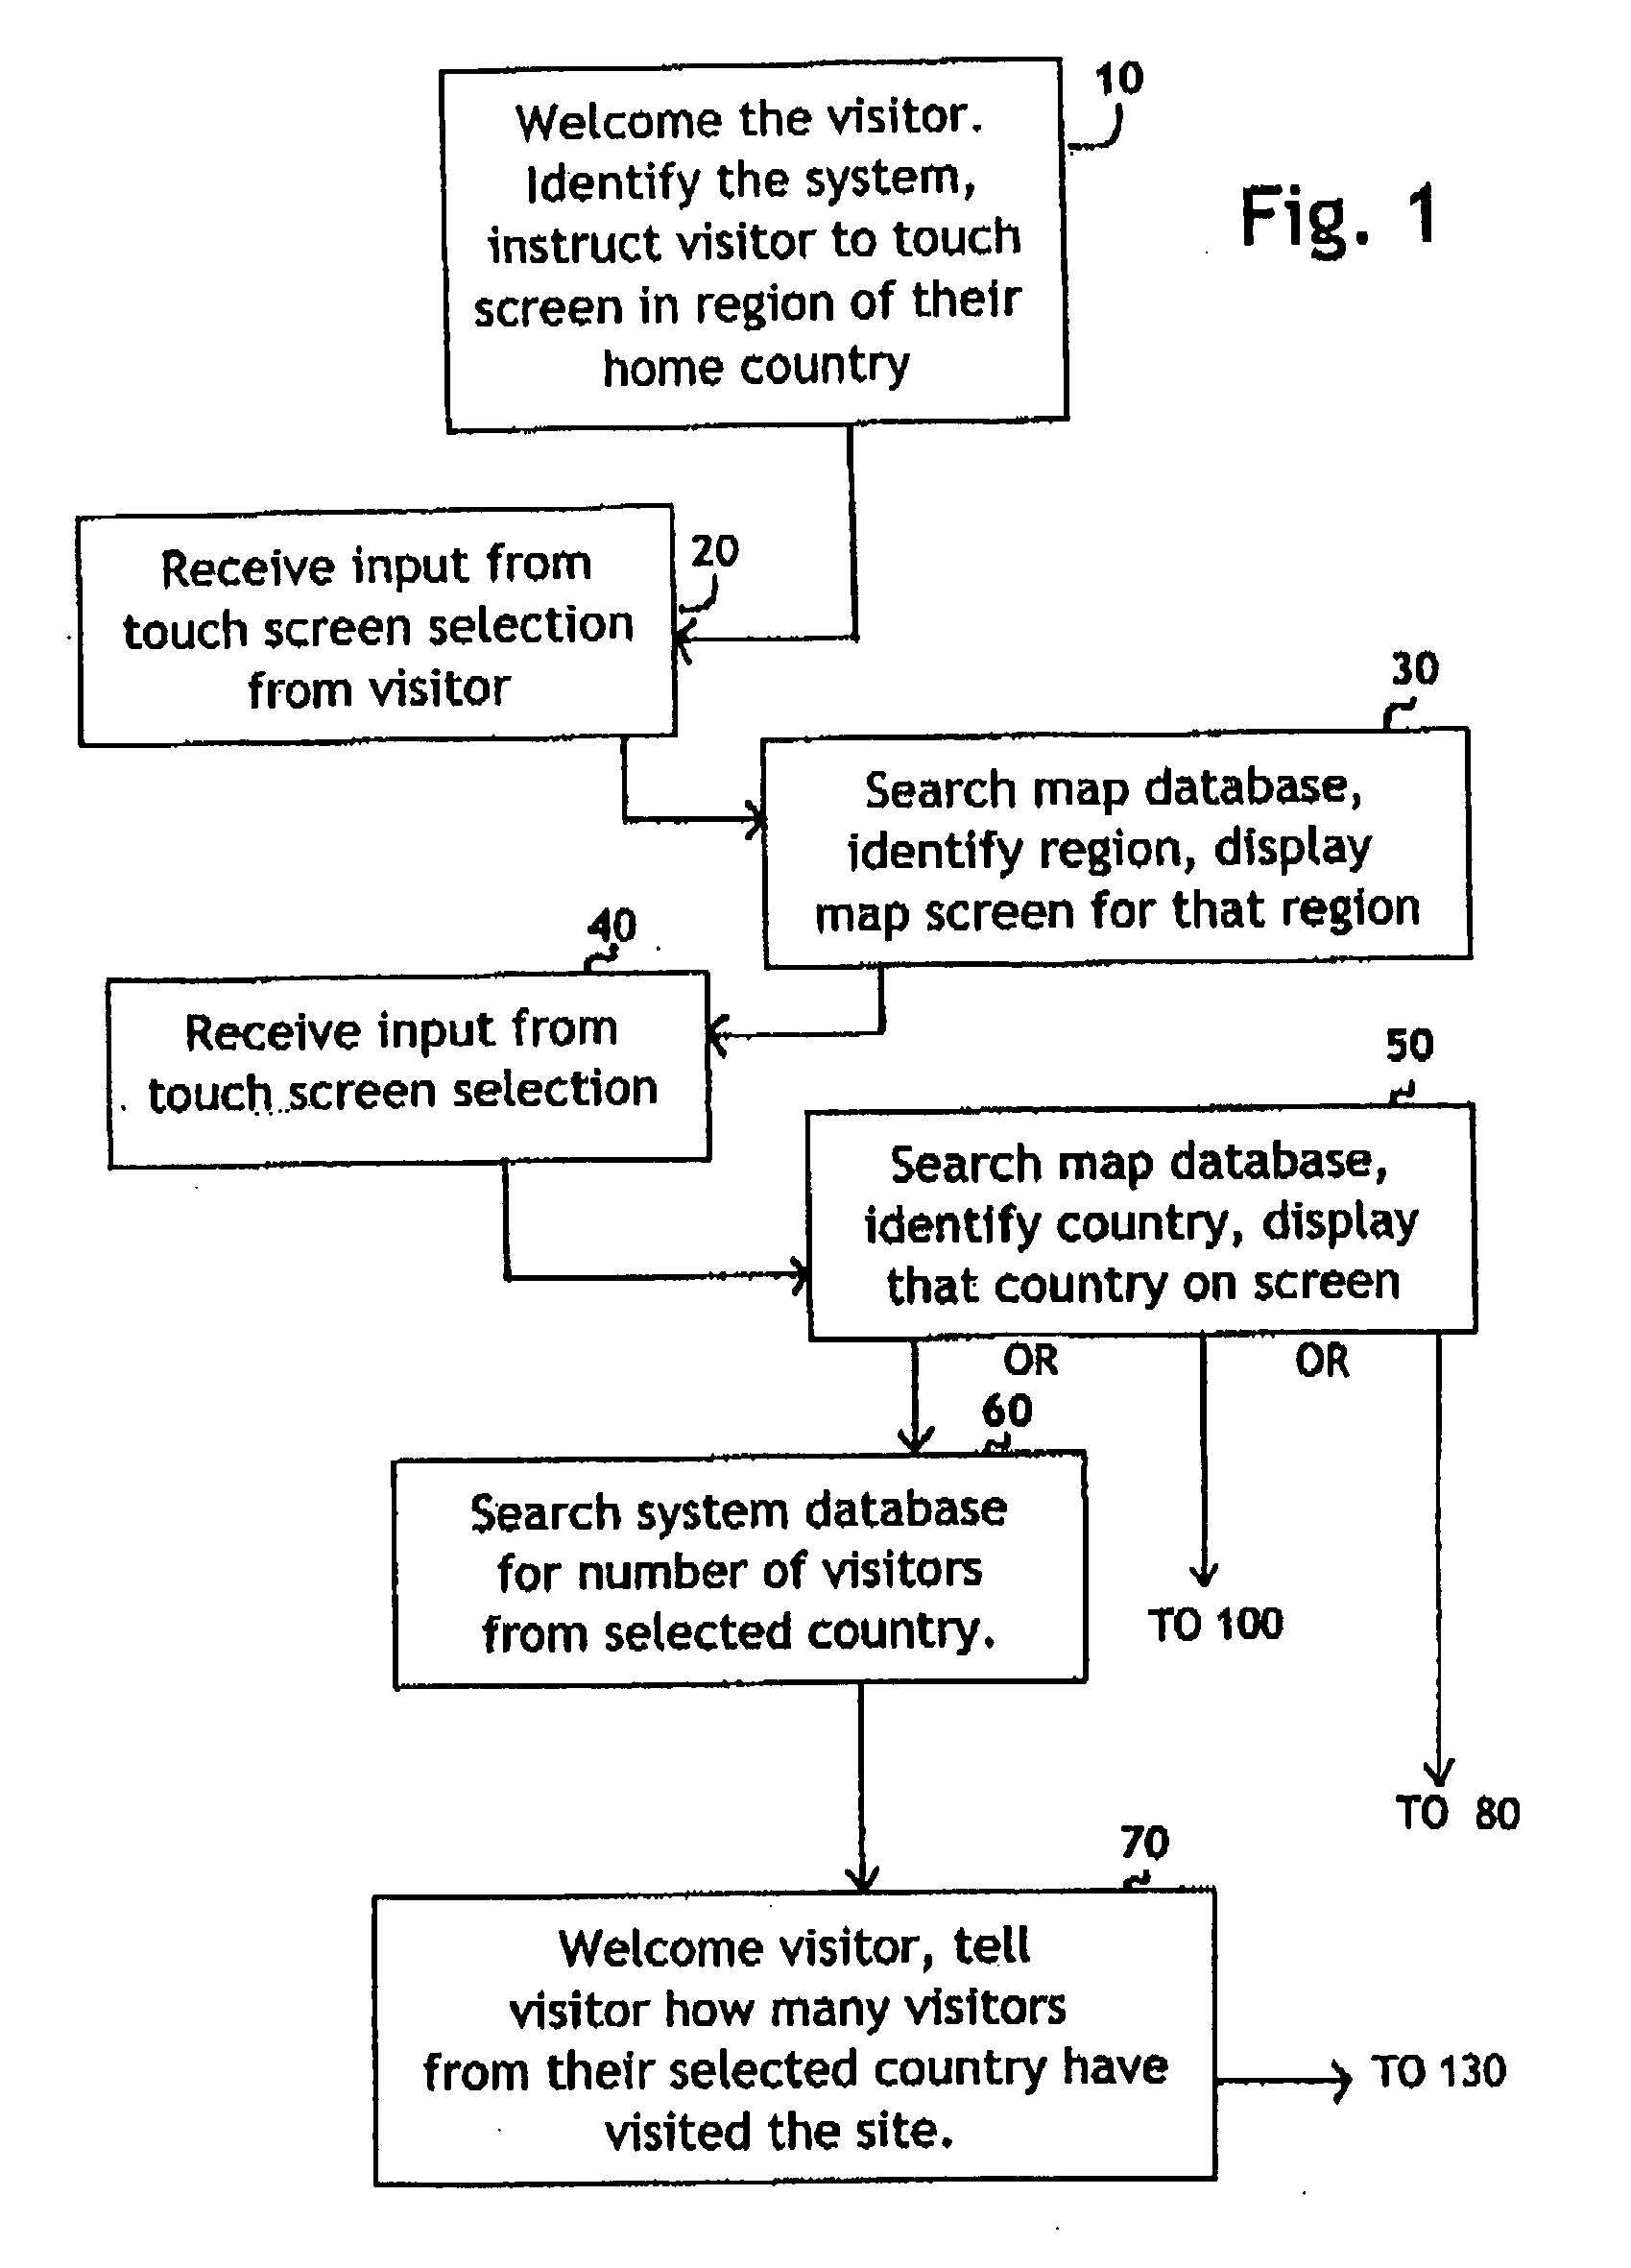 System for self-registering visitor information with geographic specificity and searchable fields